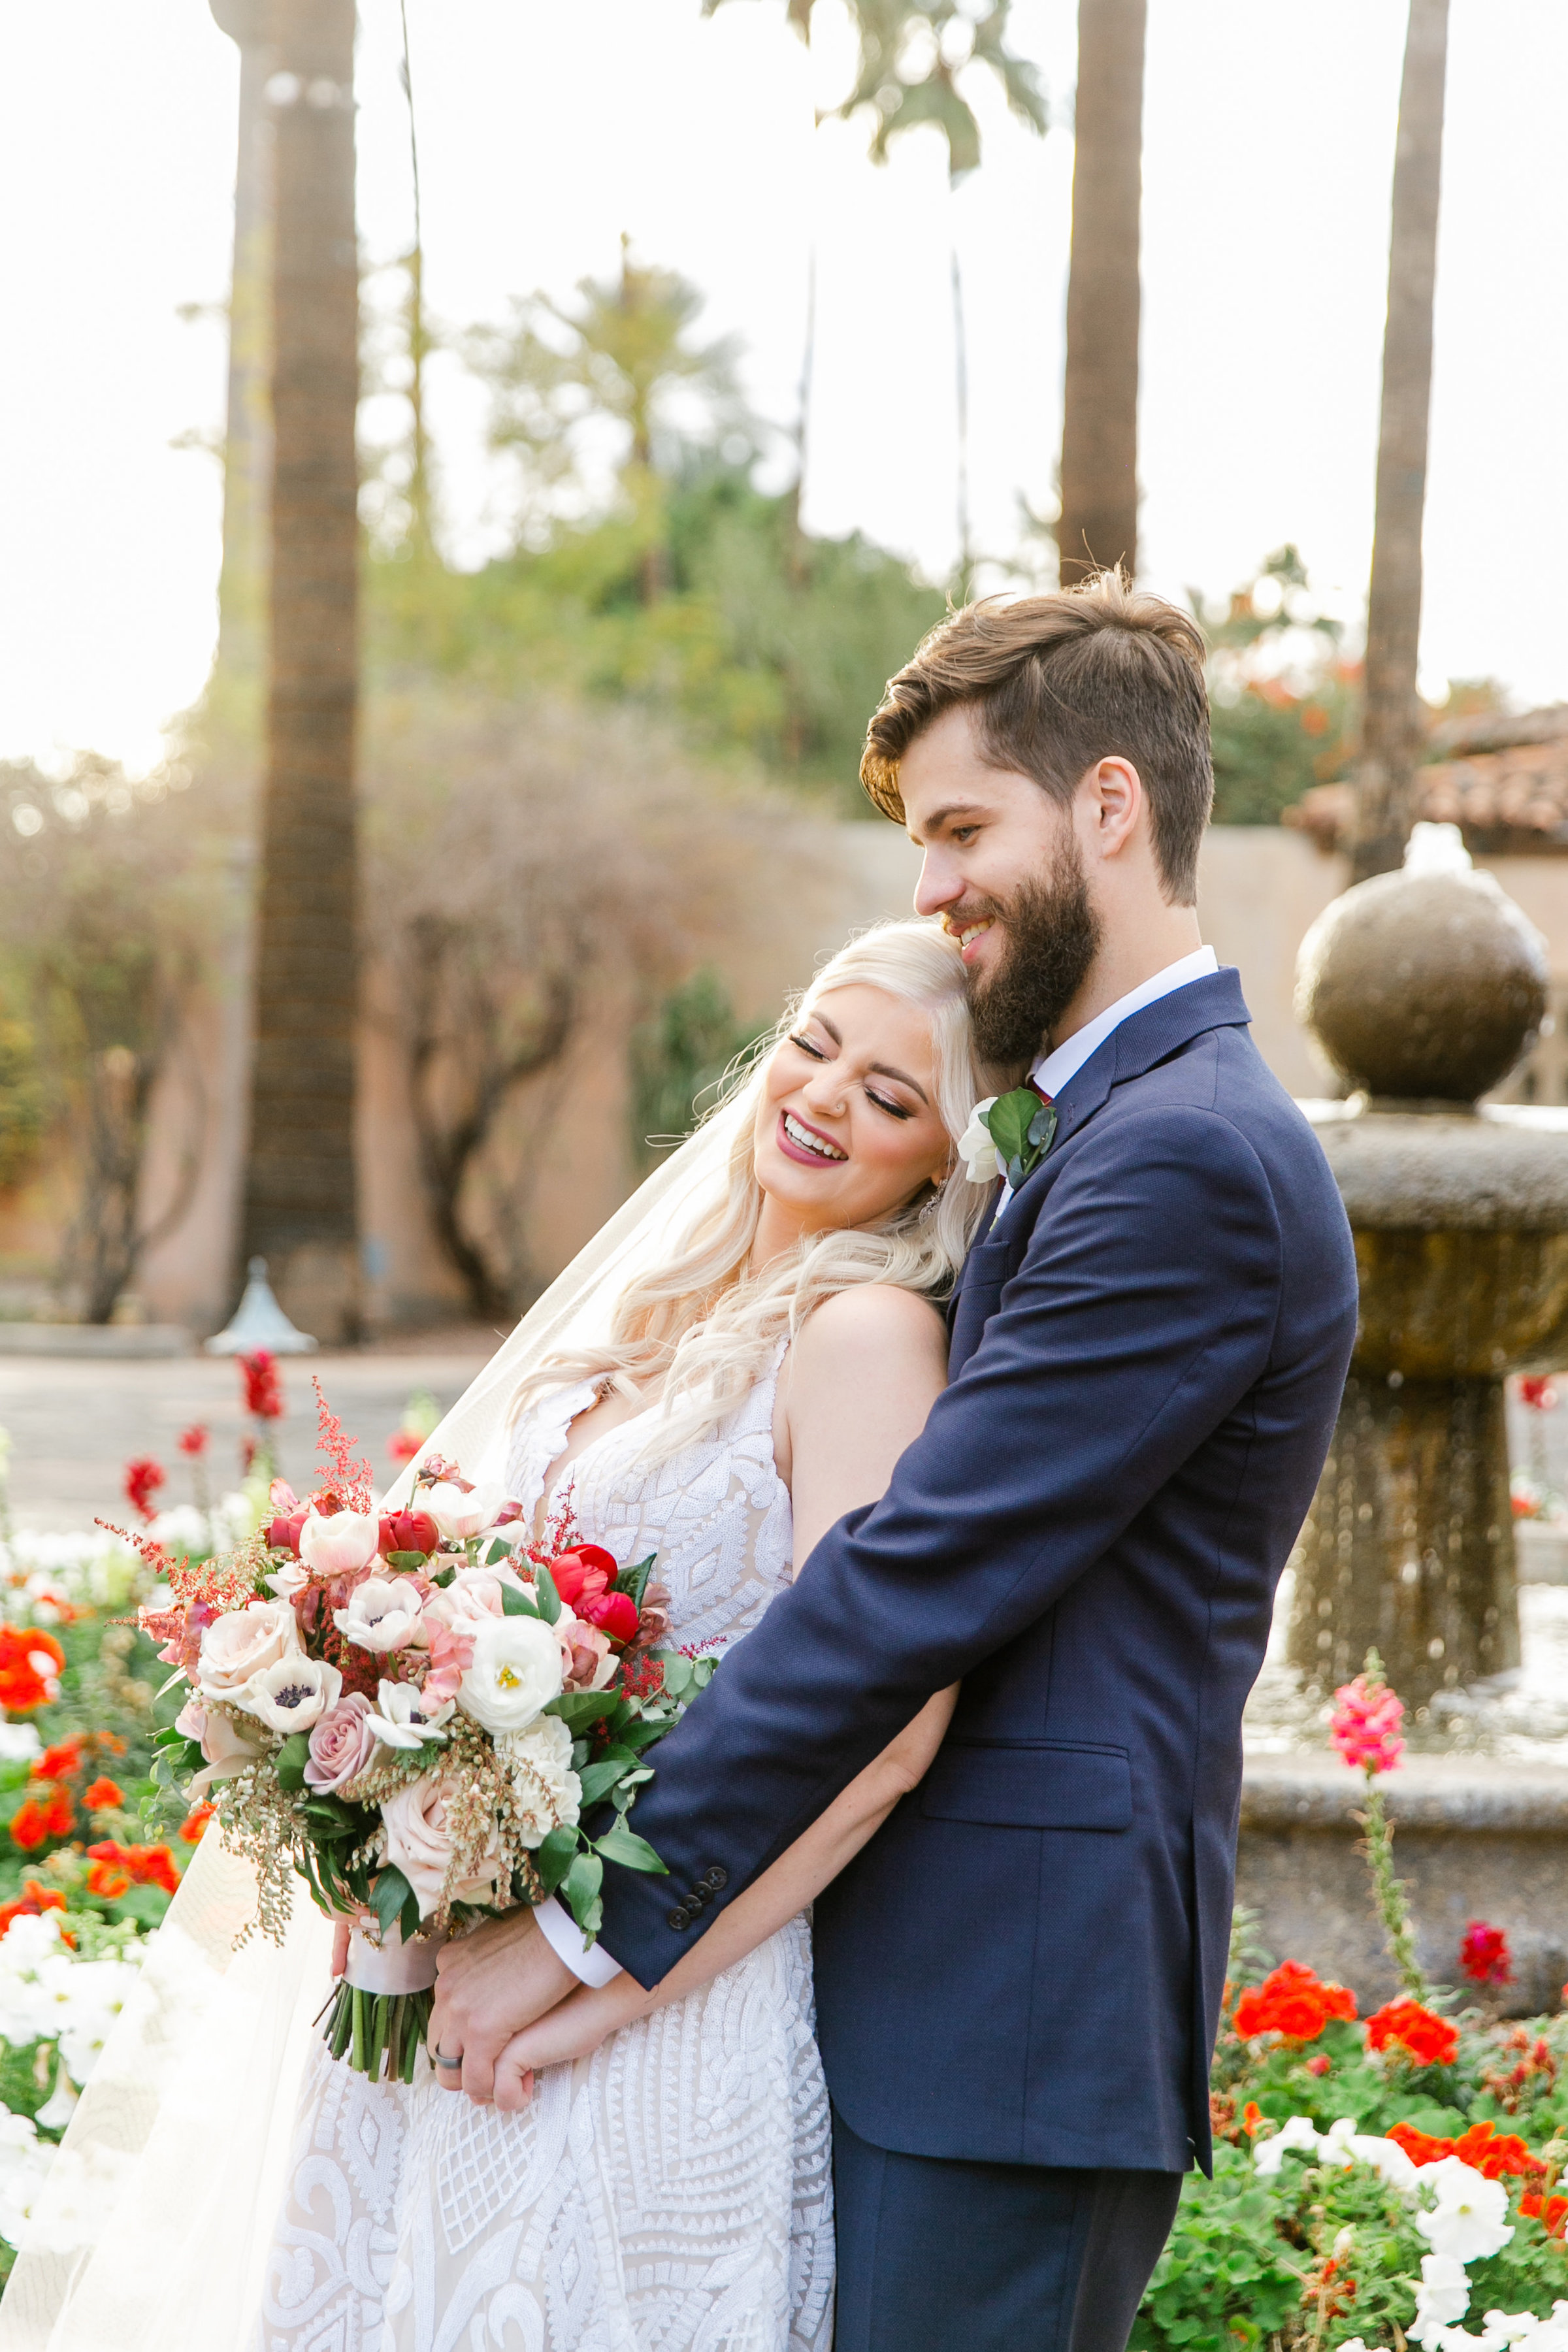 Karlie Colleen Photography - The Royal Palms Wedding - Some Like It Classic - Alex & Sam-547